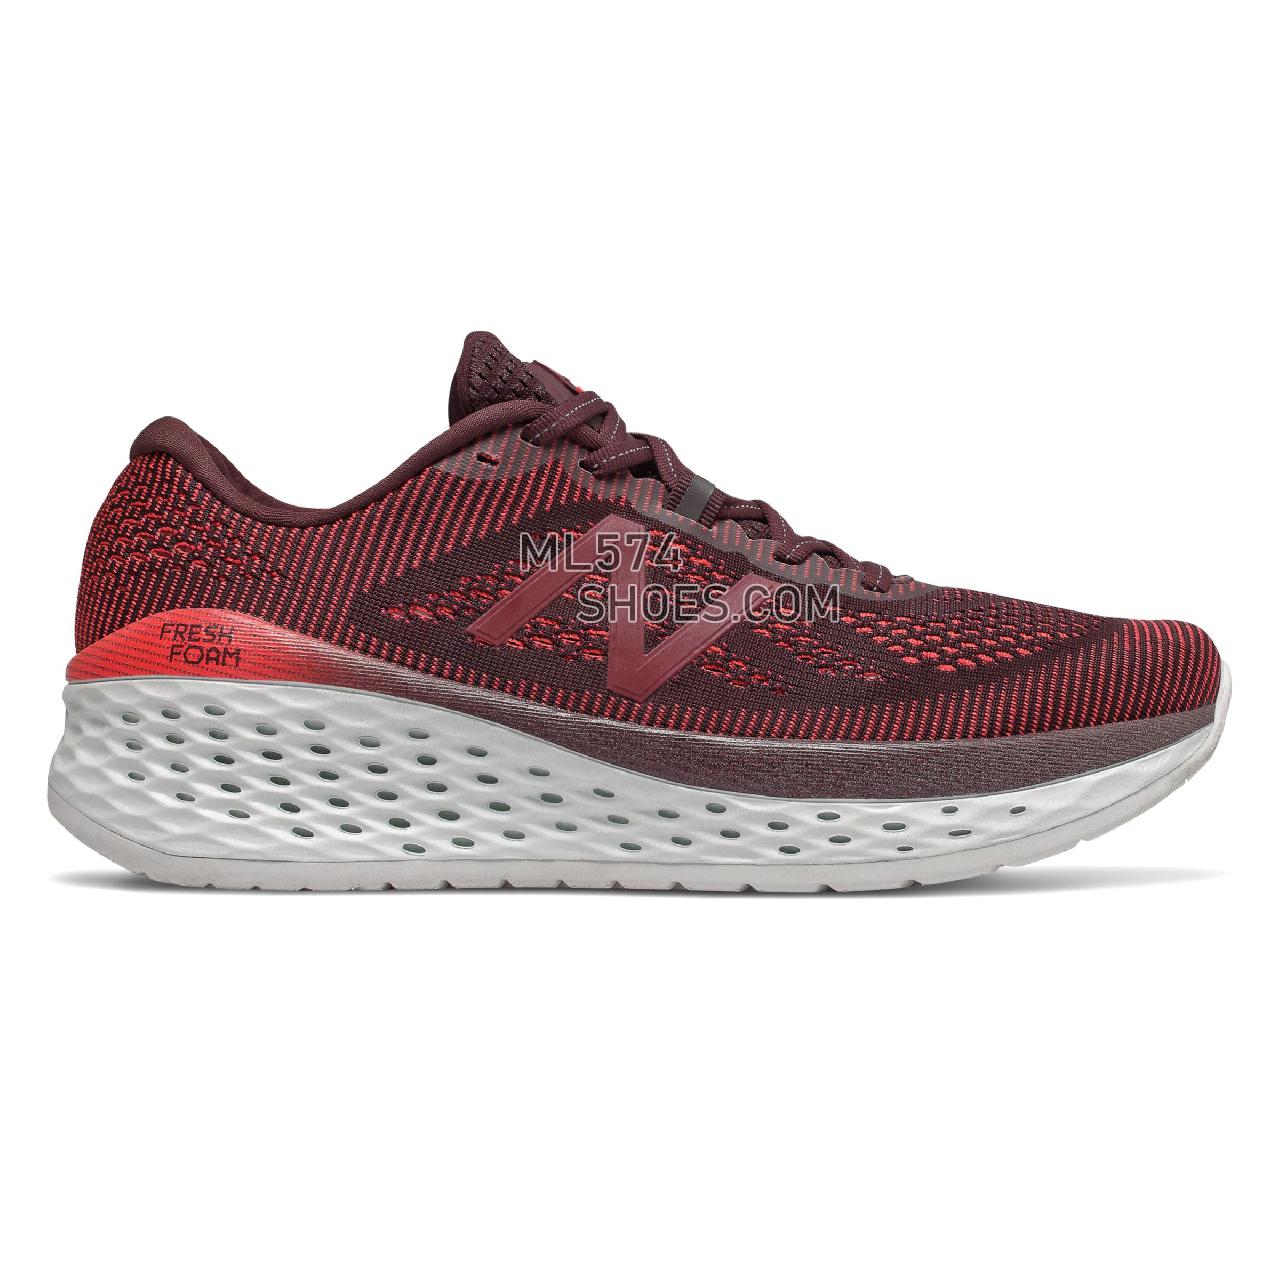 New Balance Fresh Foam More - Men's Neutral Running - Henna with Energy Red and Burgundy - MMORHN